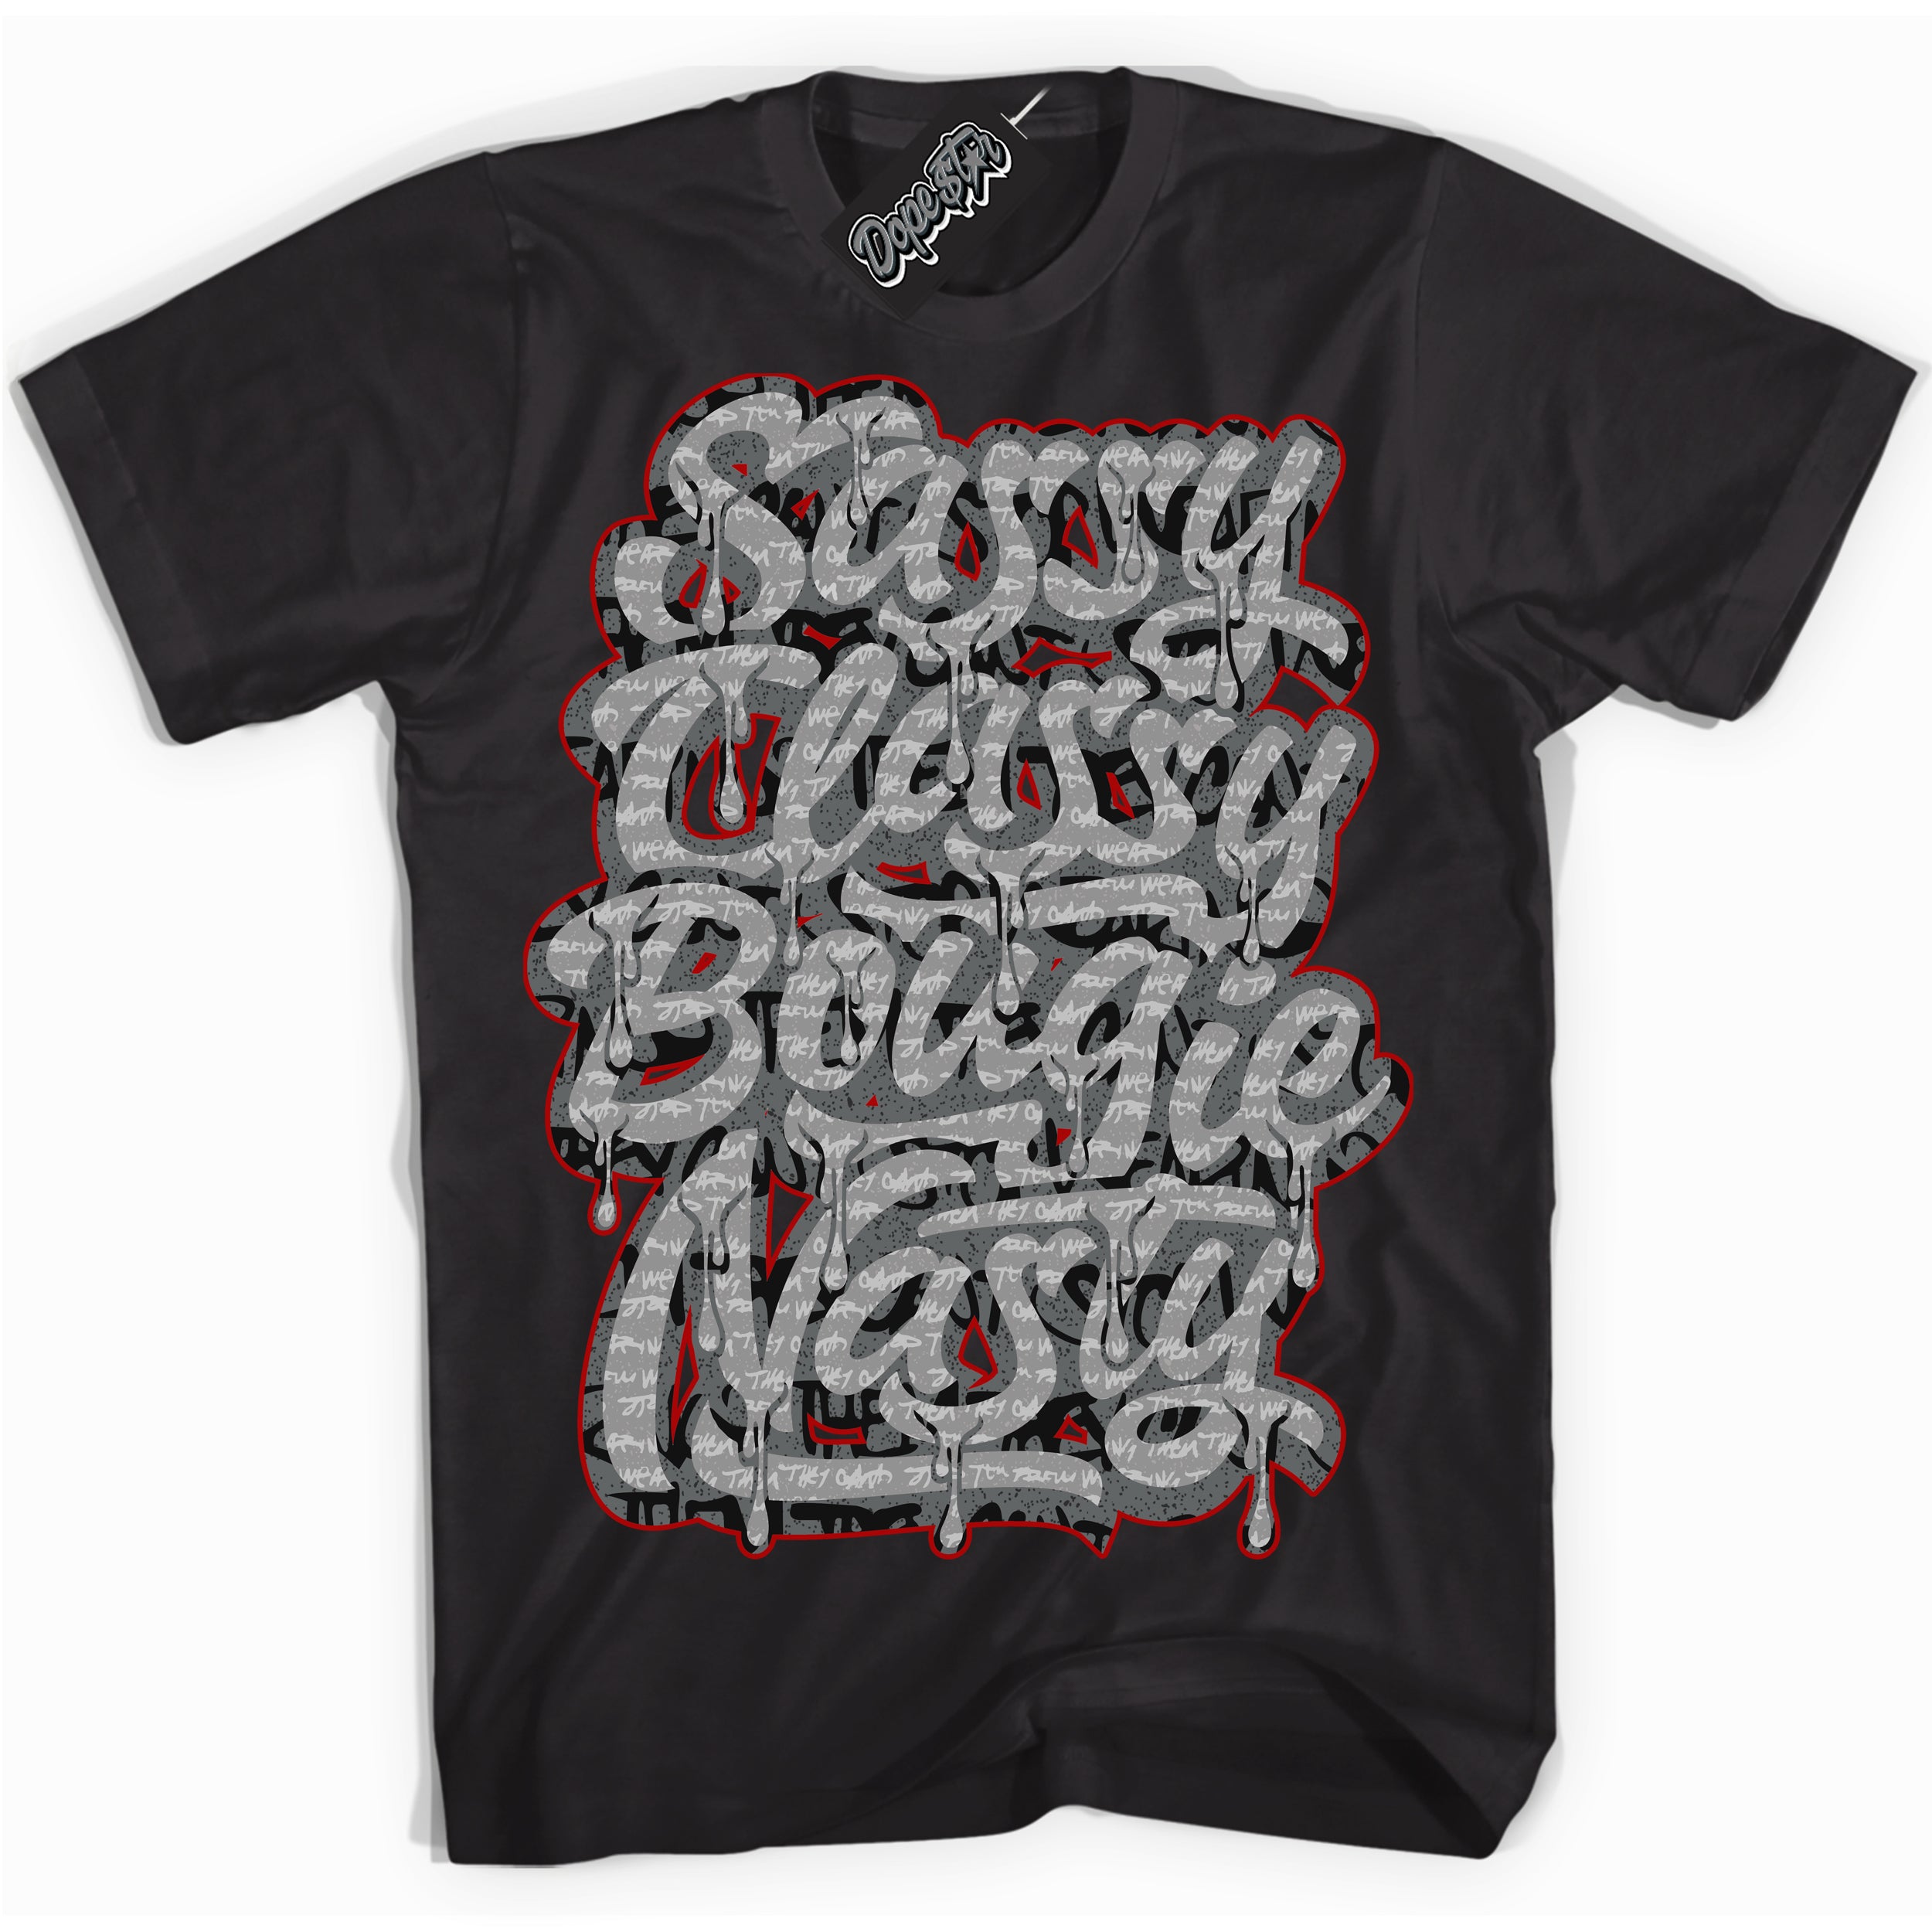 Cool Black Shirt with “ Sassy Classy ” design that perfectly matches Rebellionaire 1s Sneakers.